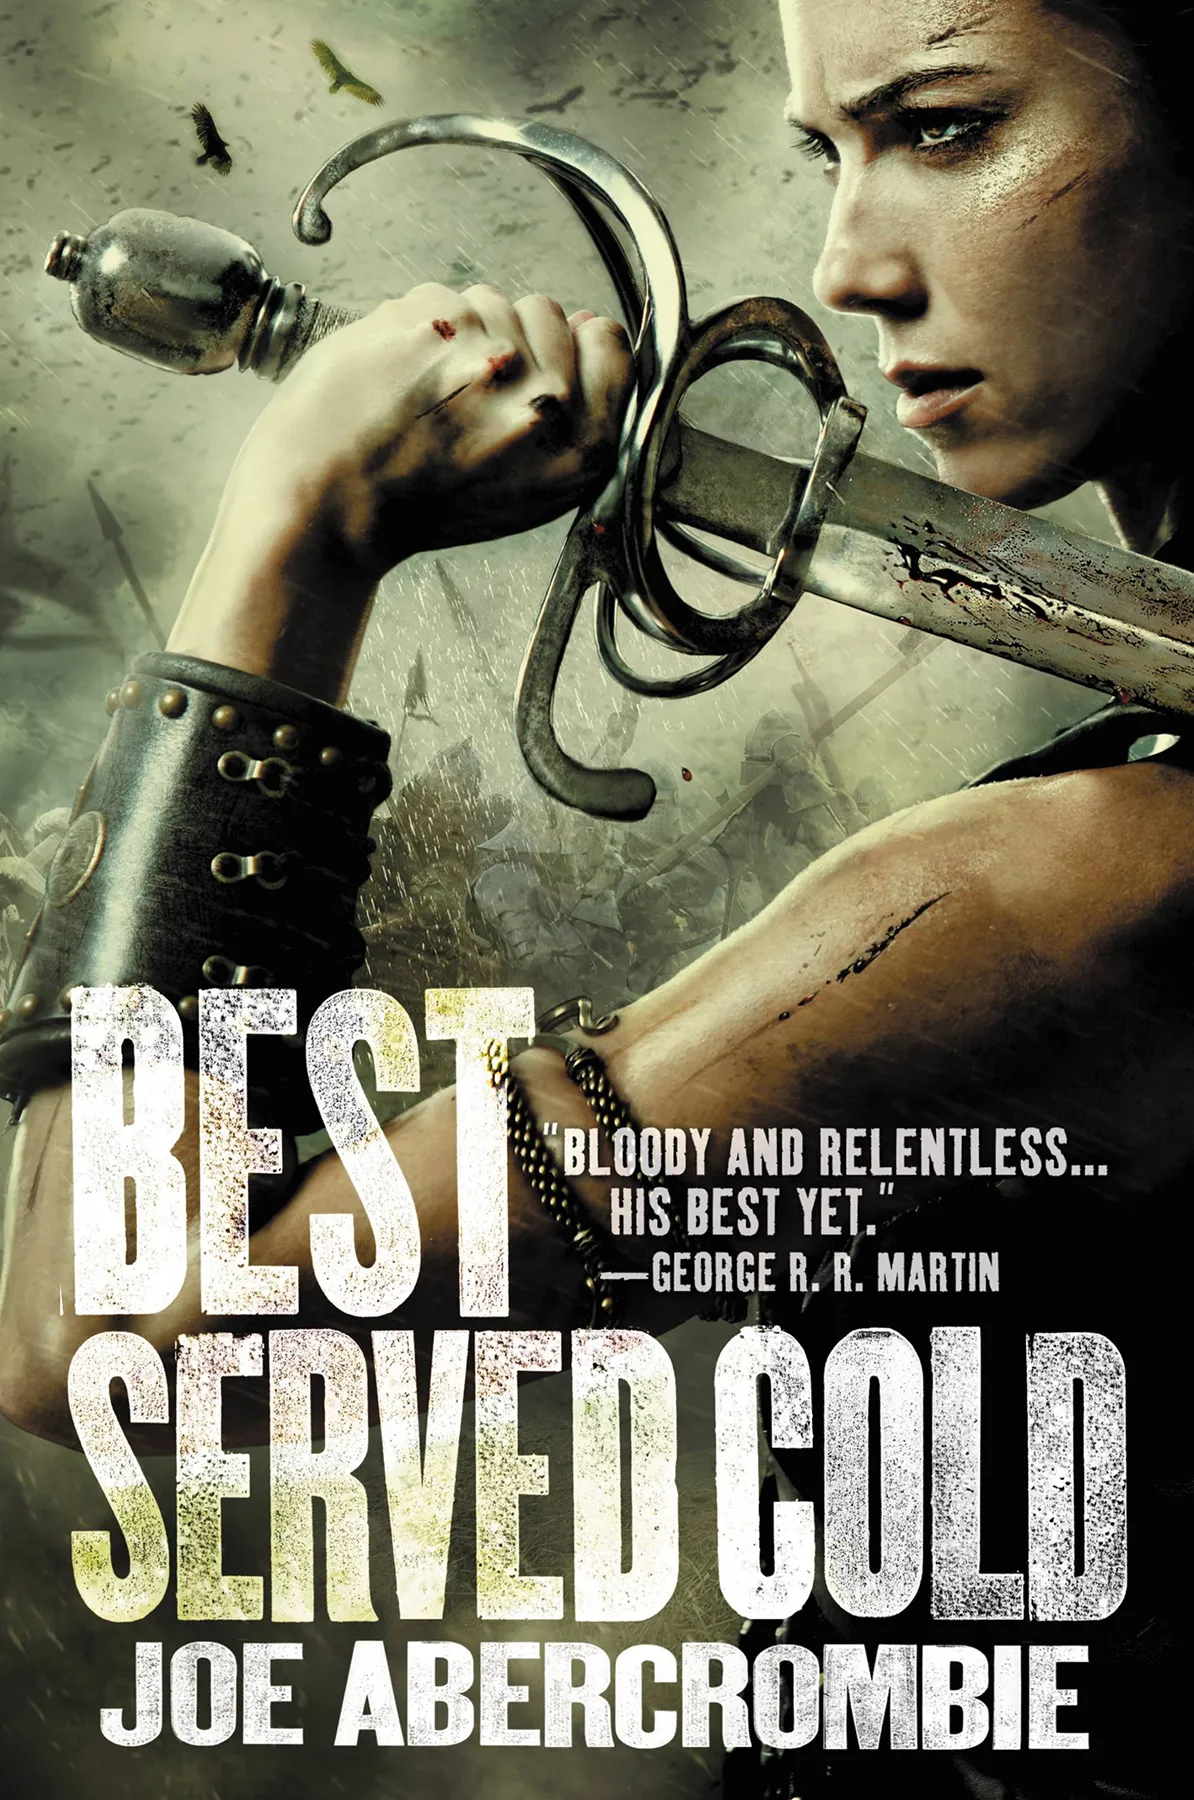 Best Served Cold (The First Law #4)